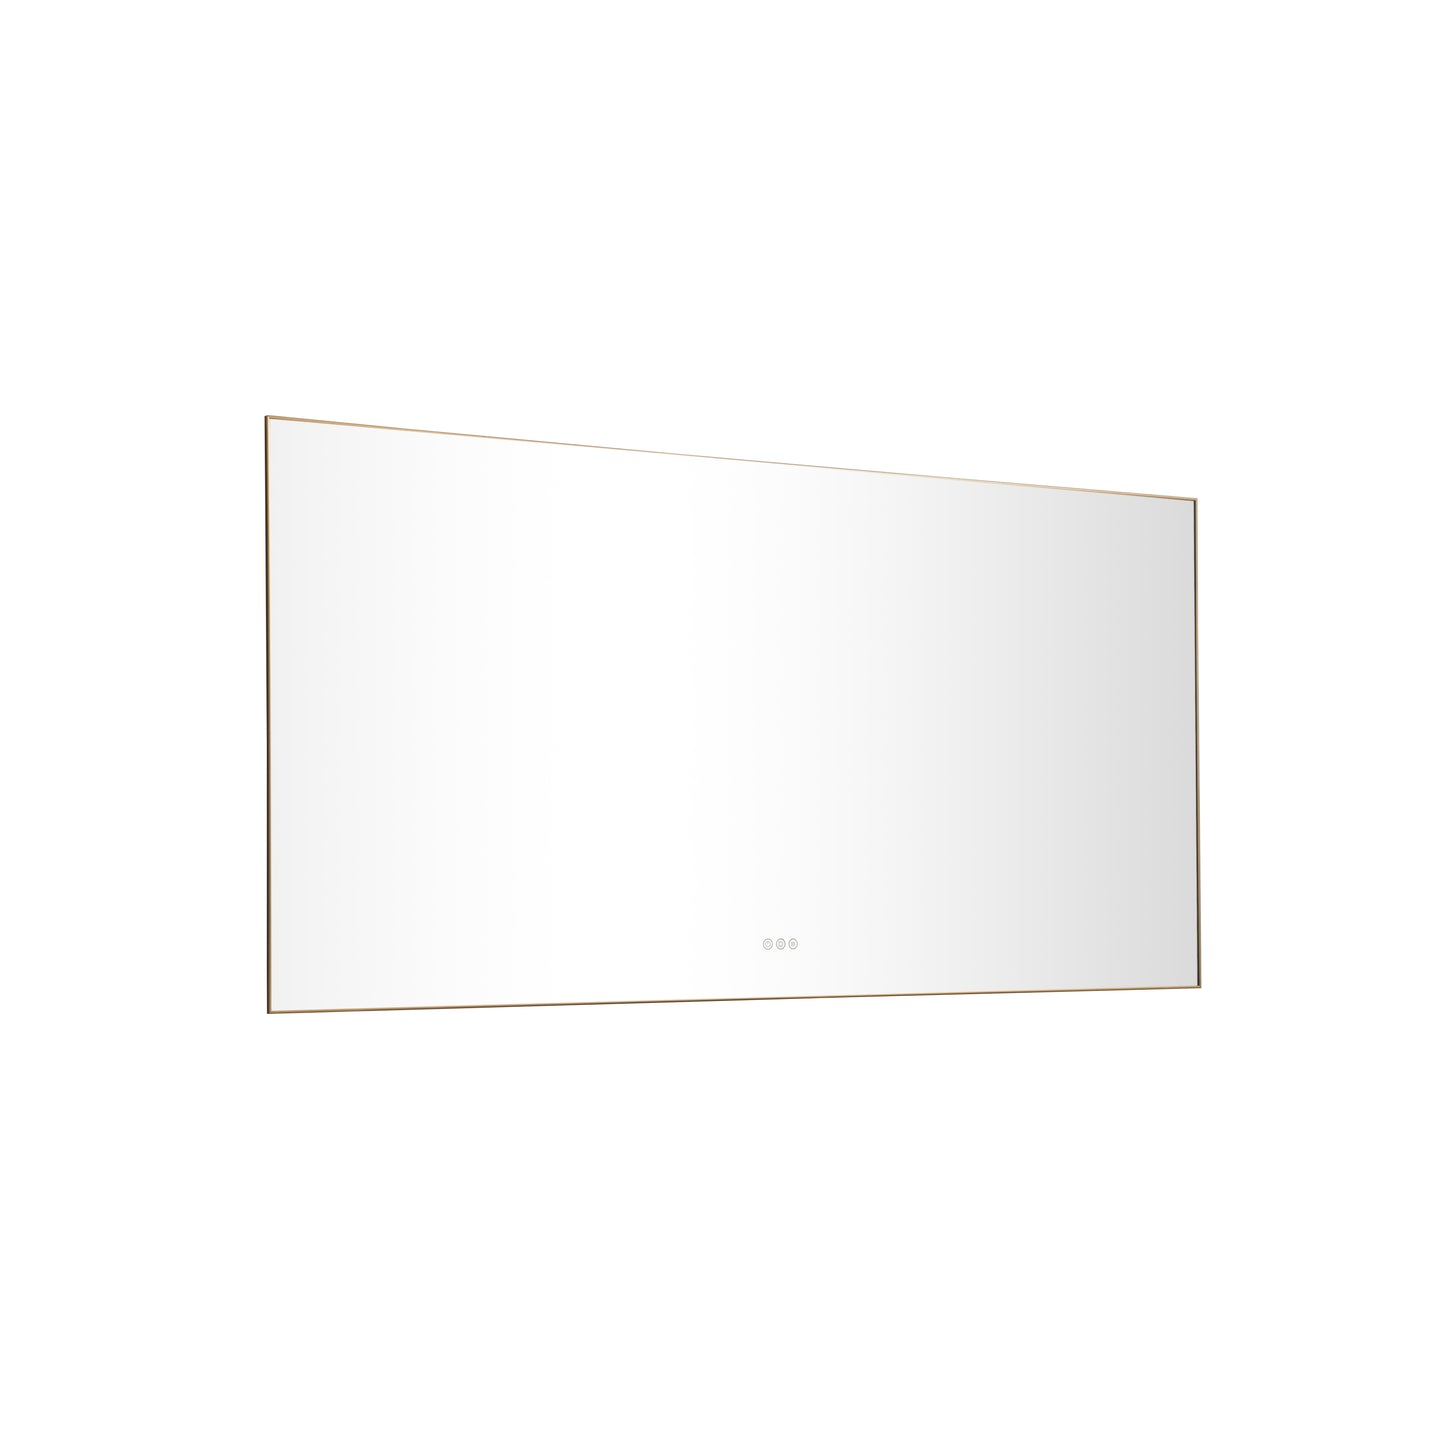 Super Bright Led Bathroom Mirror with Lights, Metal Frame Mirror Wall Mounted Lighted Vanity Mirrors for Wall, Anti Fog Dimmable Led Mirror for Makeup, Horizontal/Verti  \nGun Gray Metal